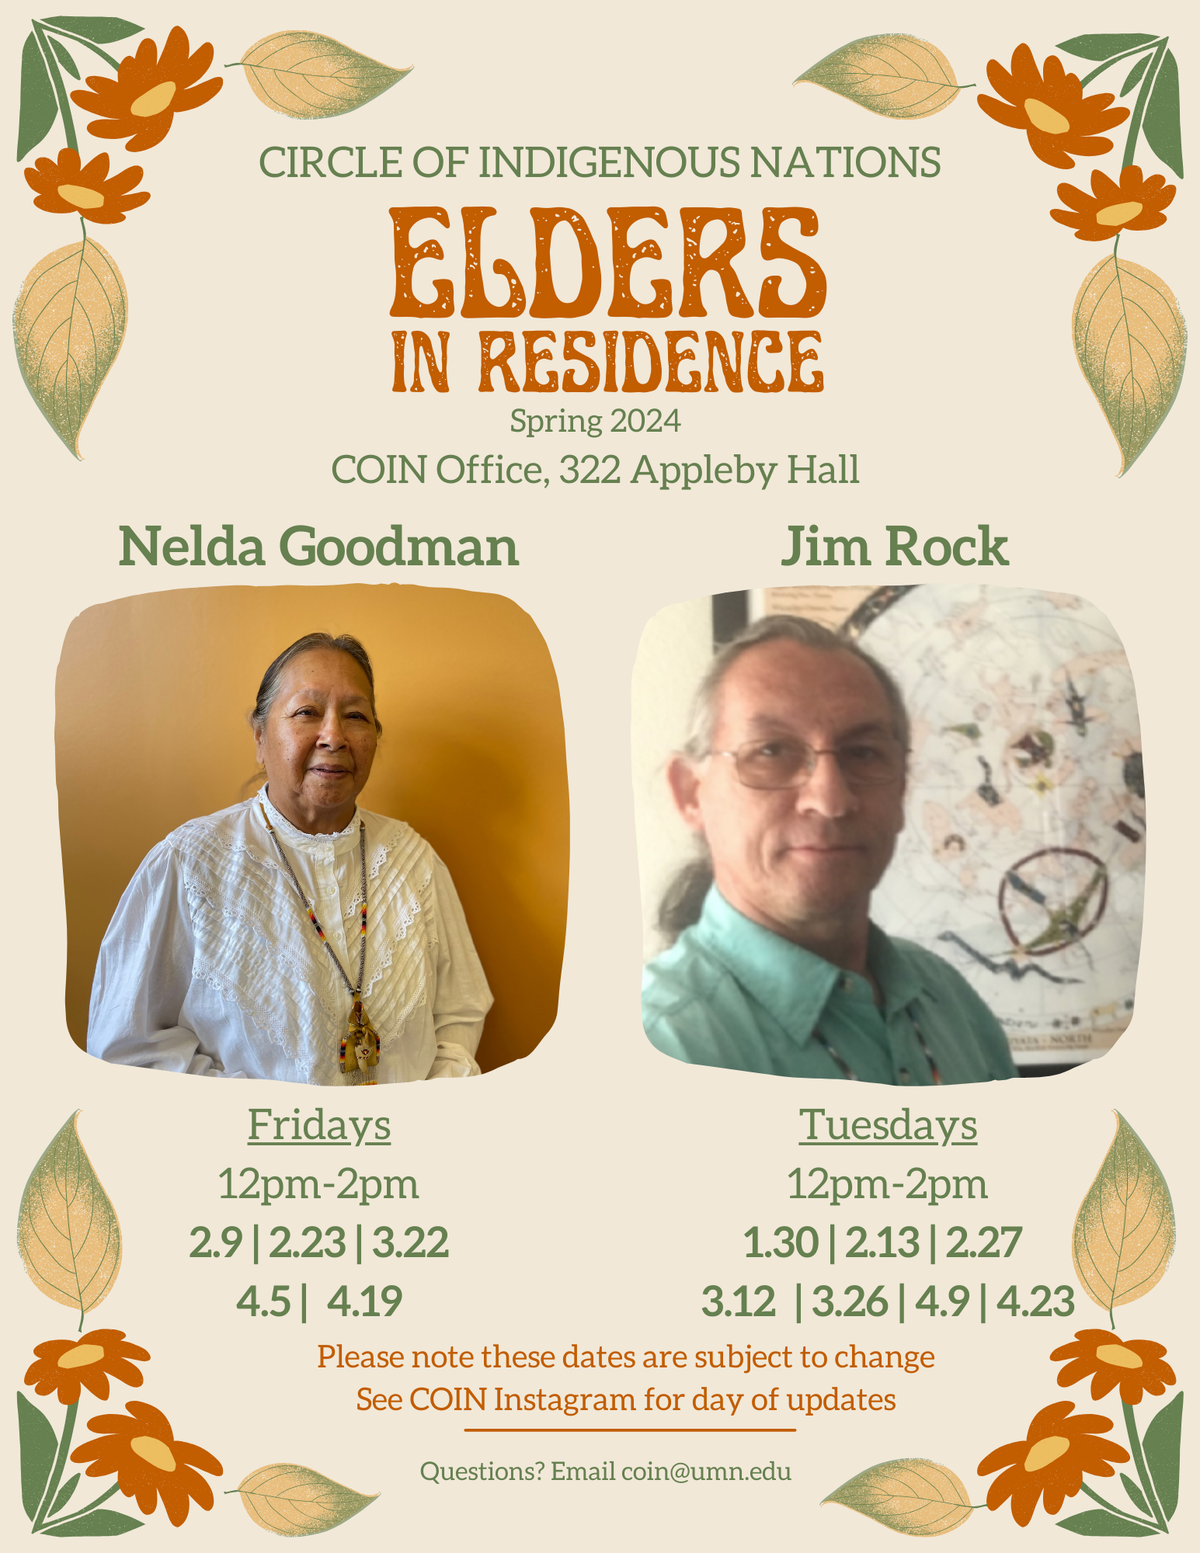 Floral bordered flyer featuring two images of a Native male elder and a native female native elder. Text reads: Circle of Indigenous Nations: Elders in Residence Spring 2024. Located in COIN office 322 appleby hall. Nelda goodman will have hours on Fridays 12-2pm on 2/9, 2/23, 3/22, 4/5, 4/19. Jim Rock will have hours on Tuesdays from 12-2pm on 1/30, 2/13, 2/27, 3/12, 3/26, 4/9, and 4/23. Please note that these dates are subject to change. See COIN instagram for any updates. Questions? Contact COIN@umn.edu